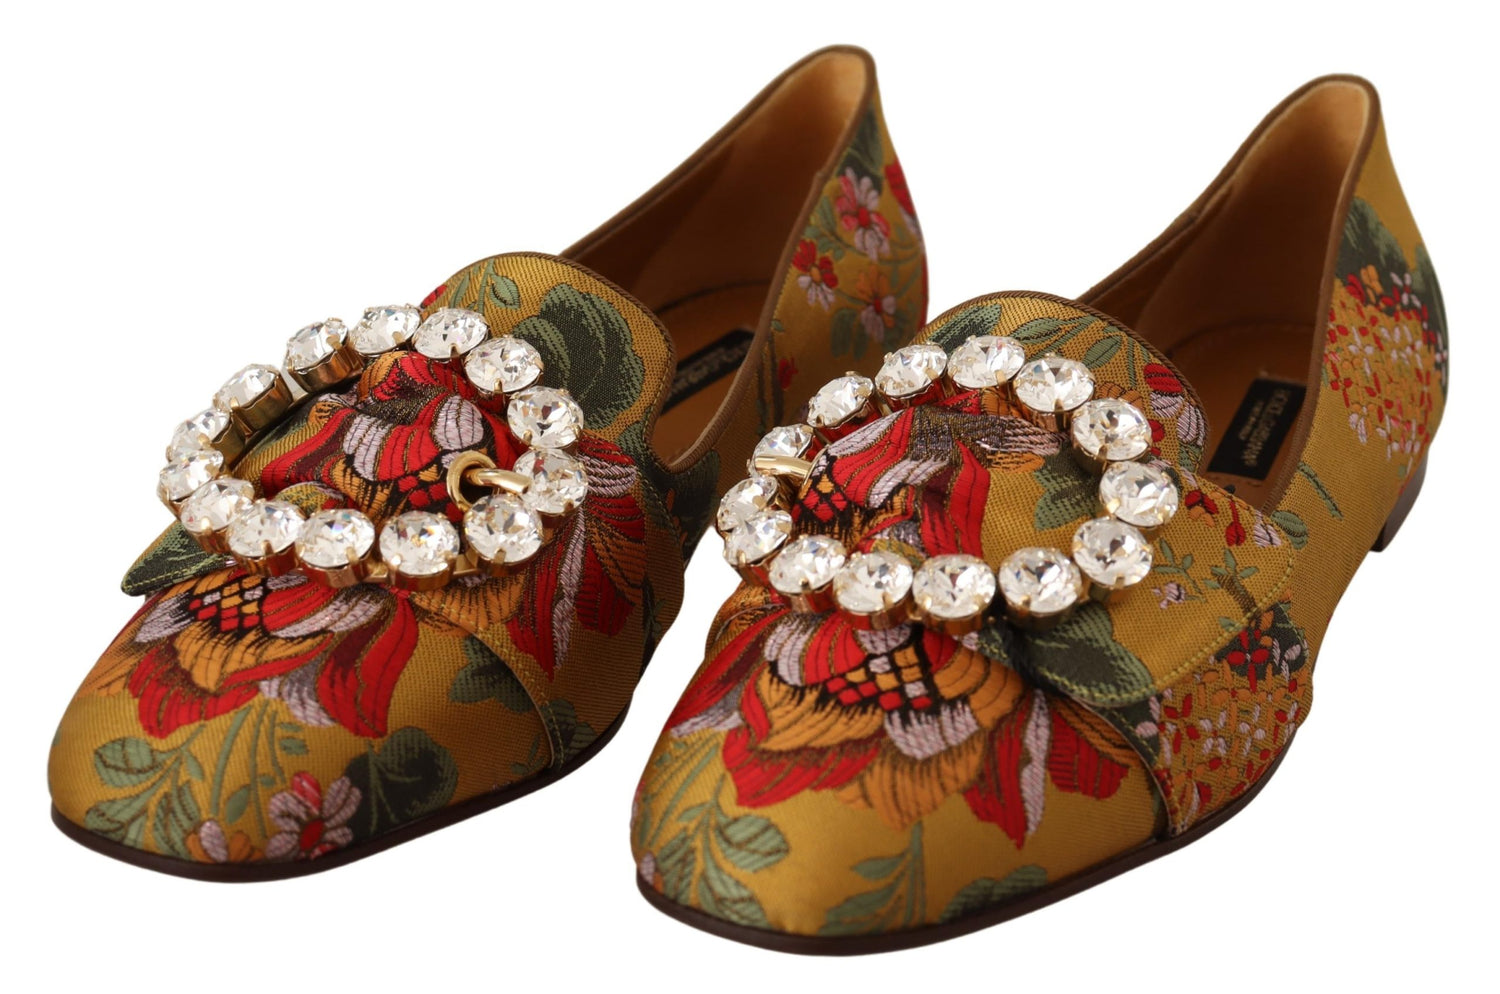 Floral Jacquard Crystal Brooch Loafers Shoes